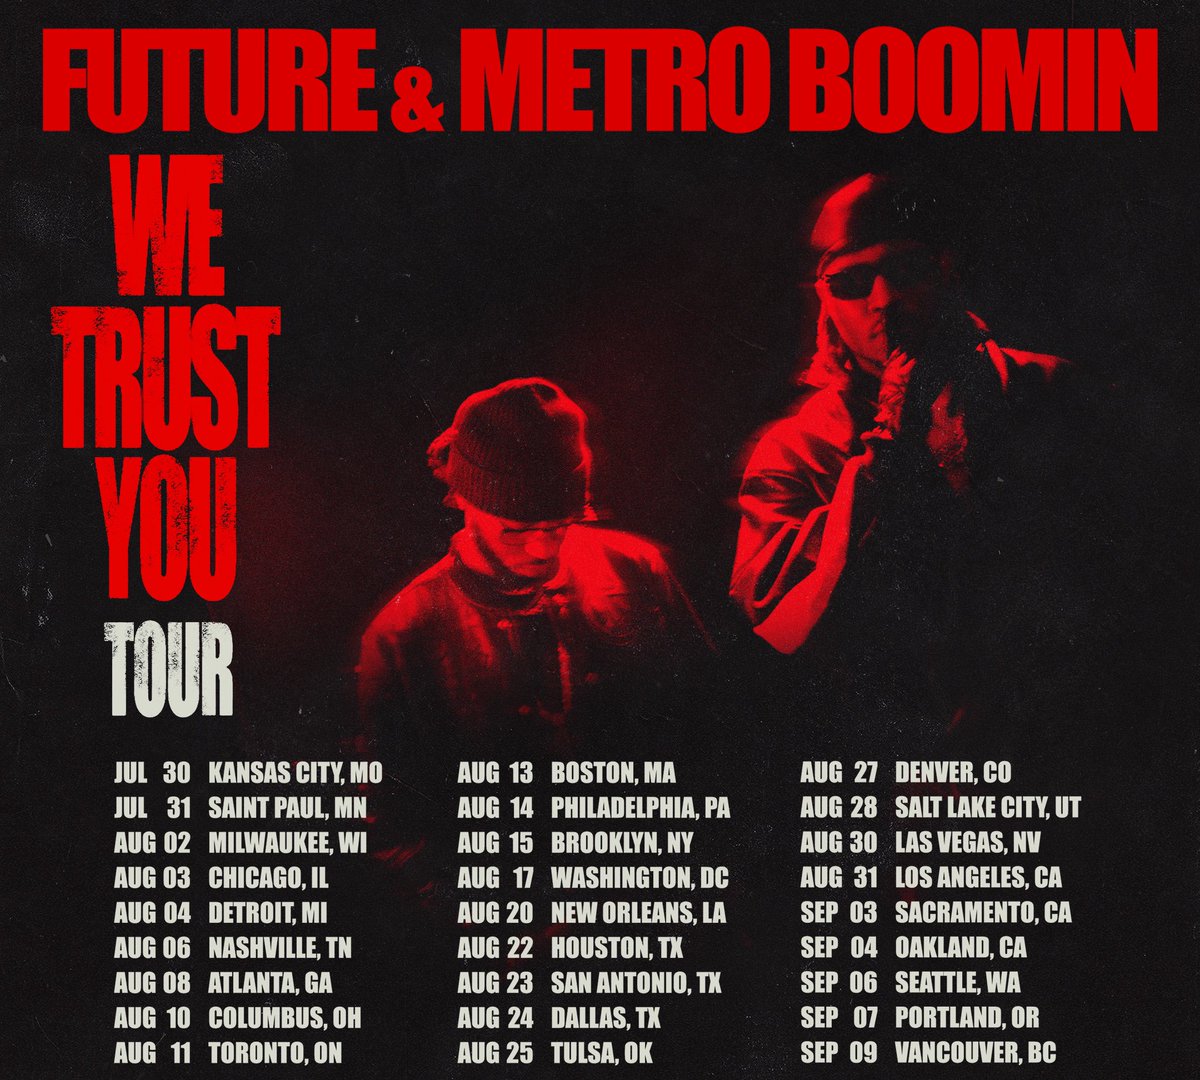 🚨 FUTURE & METRO BOOMIN

“WE TRUST YOU” TOUR
 
JULY 30 UNTIL SEPTEMBER 9